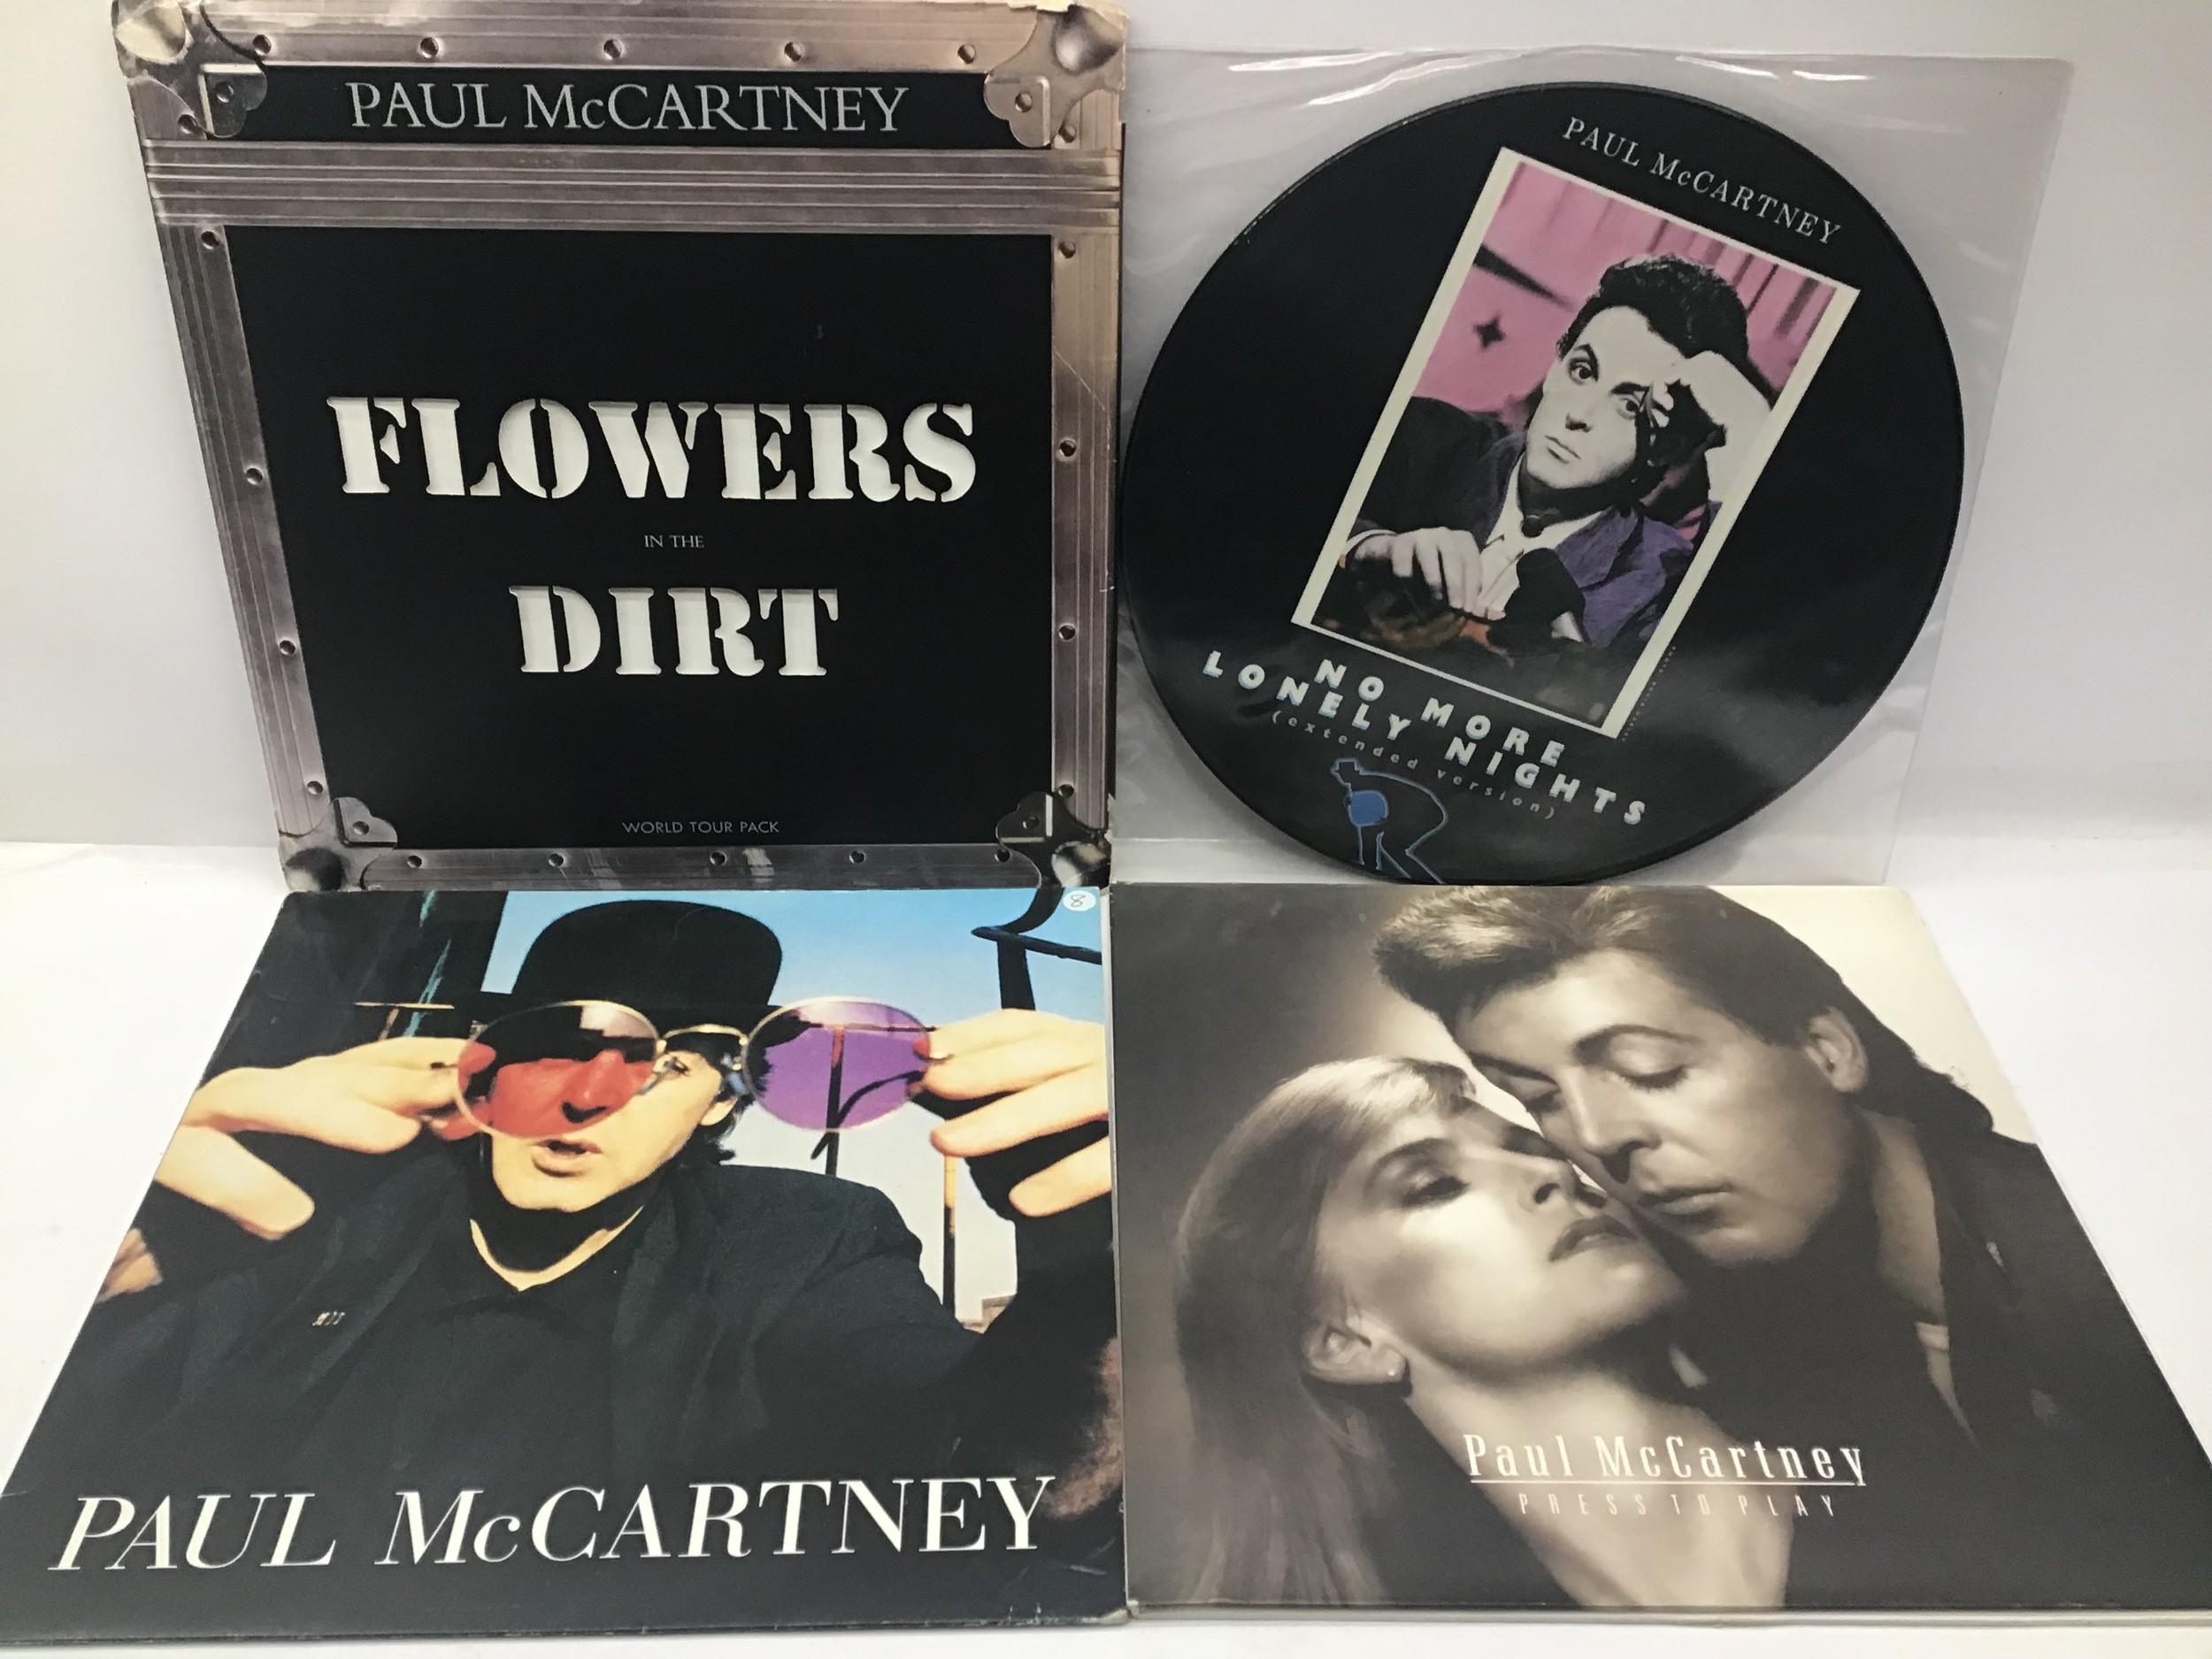 PAUL McCARTNEY SELECTION OF VINYL 12” RECORDS. This selection consists of - Flowers in the Dirt Worl